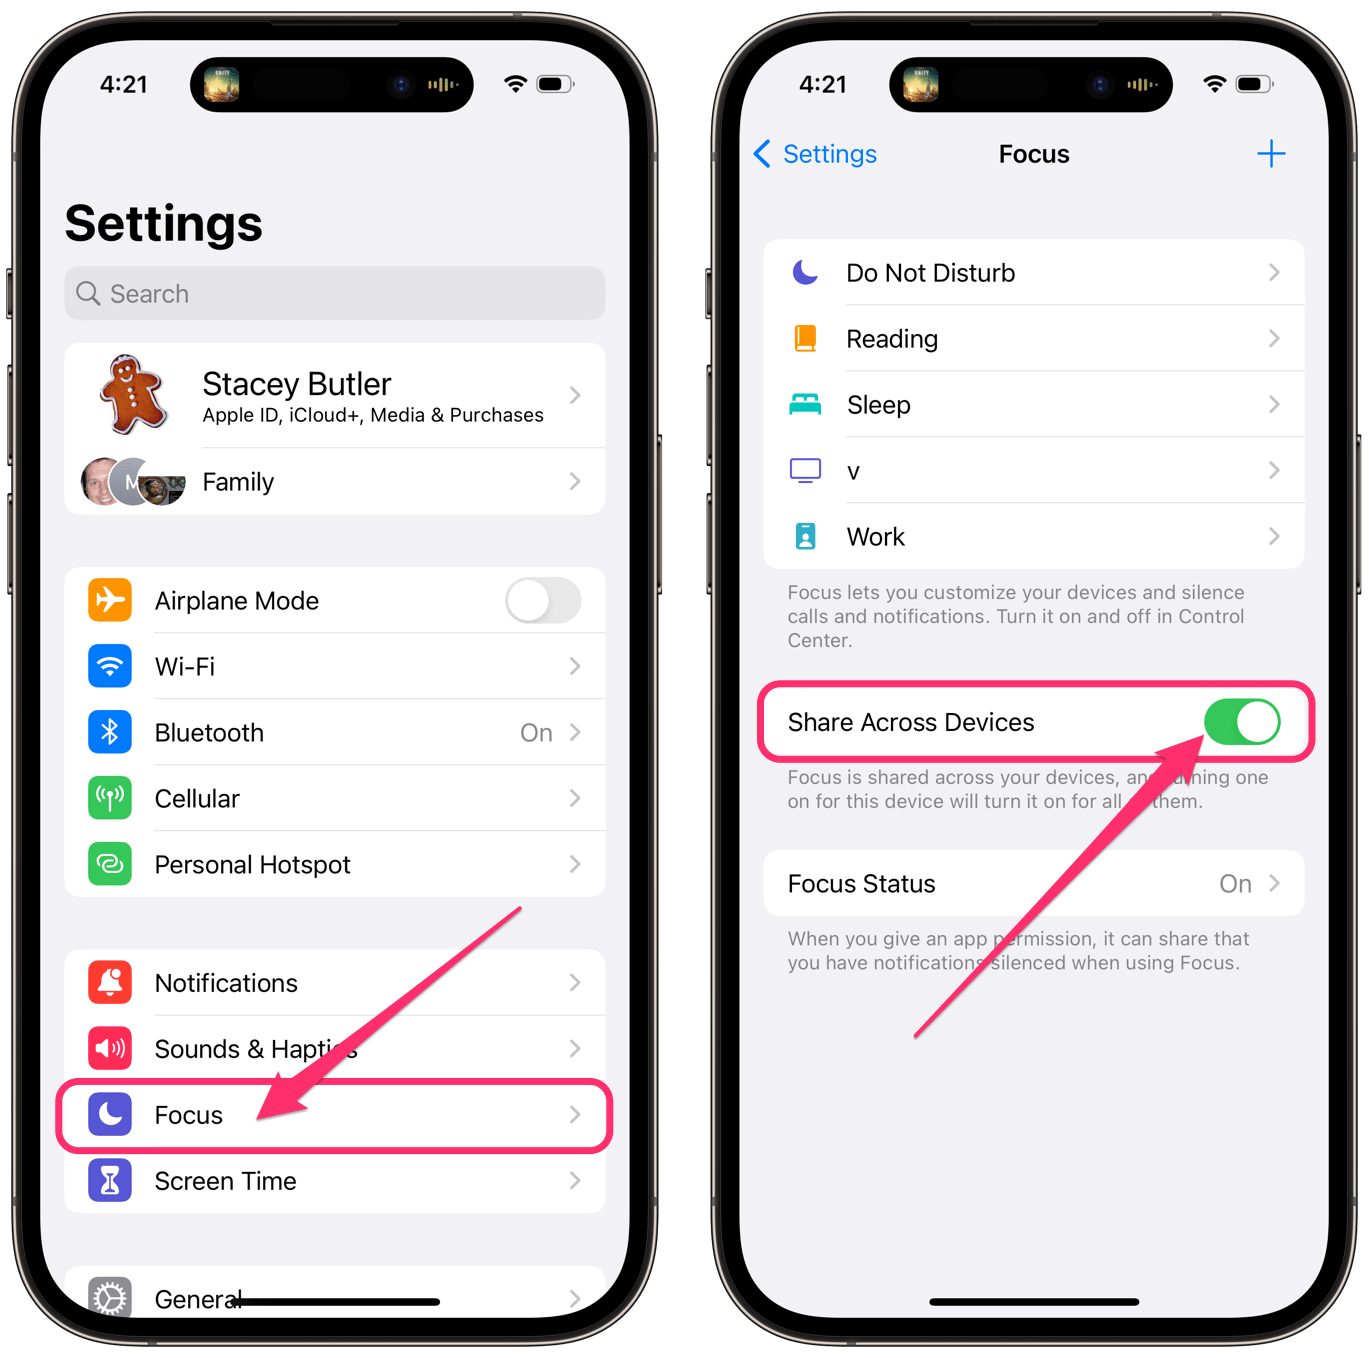 share focus across devices on iPhone